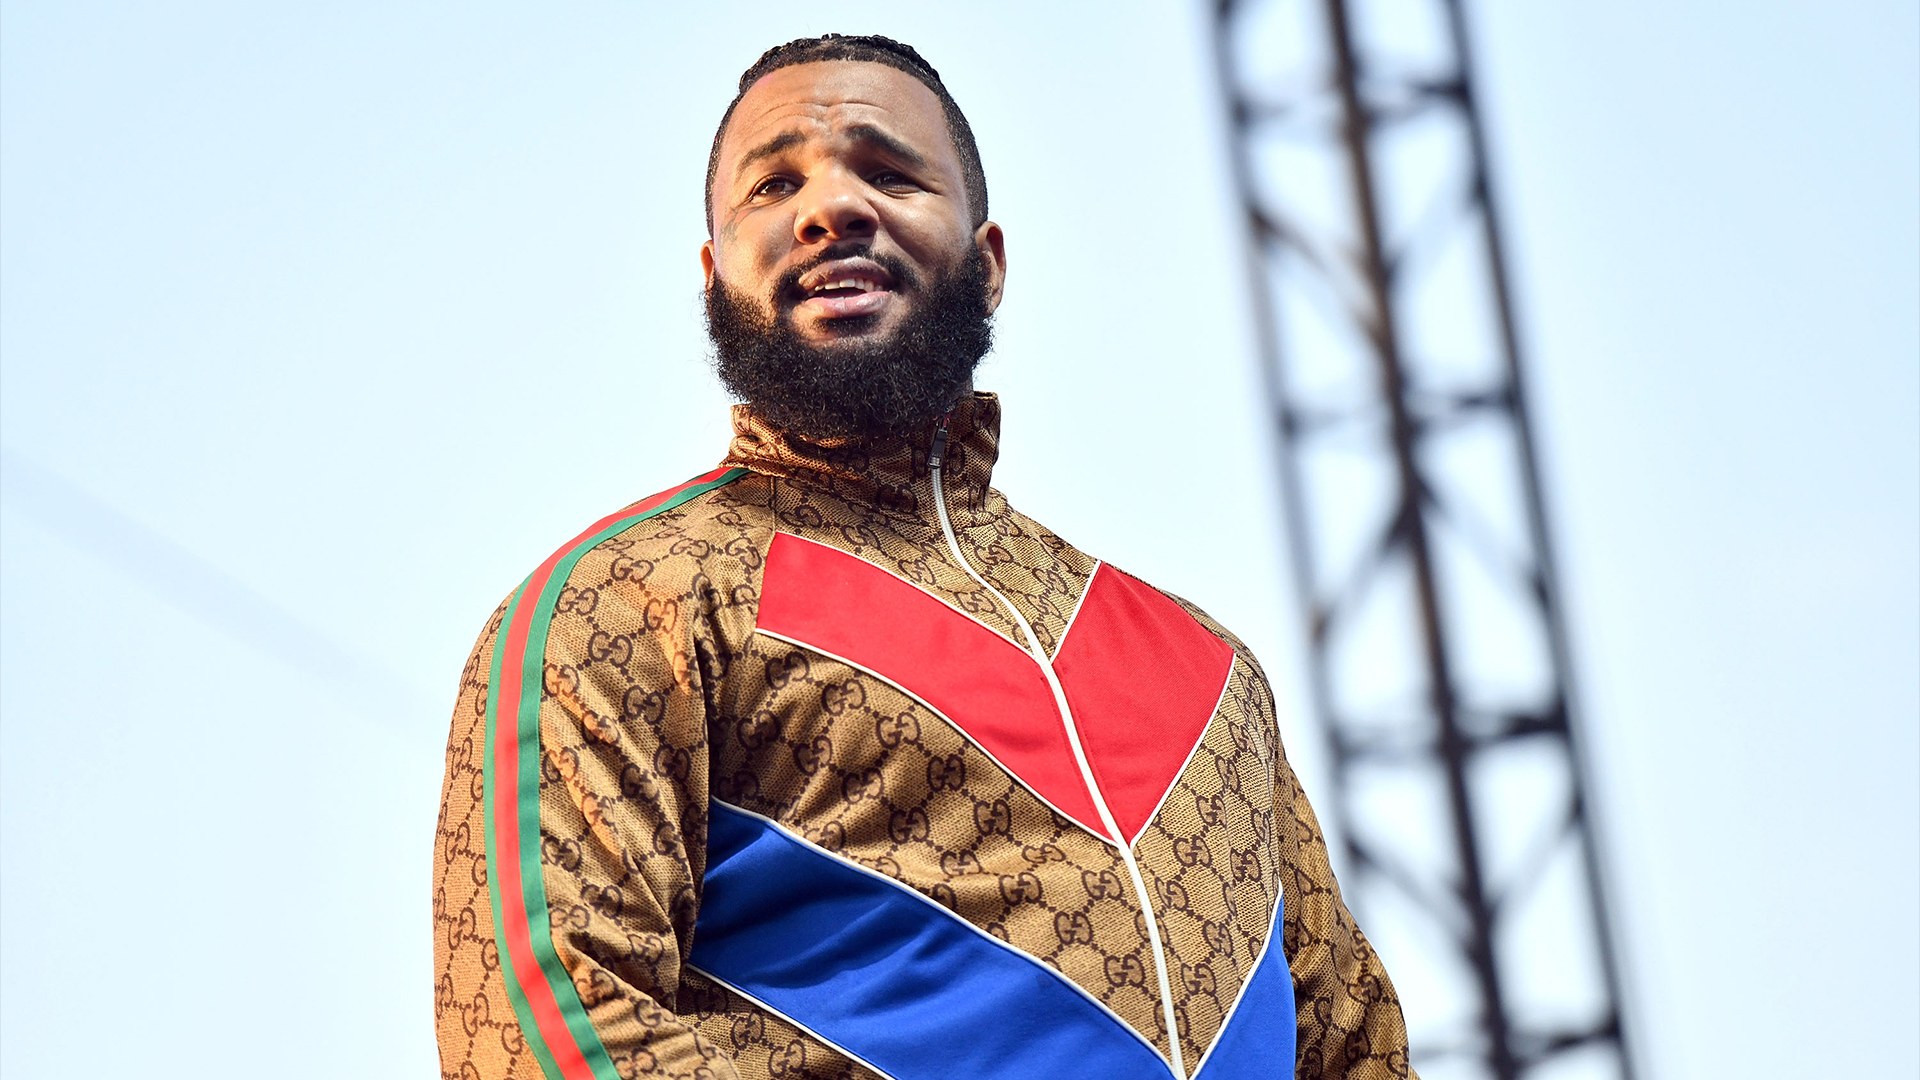 Was The Game's Twitter Restricted For Referring To Interscope Records As A 'Modern Day Slave Trade?'